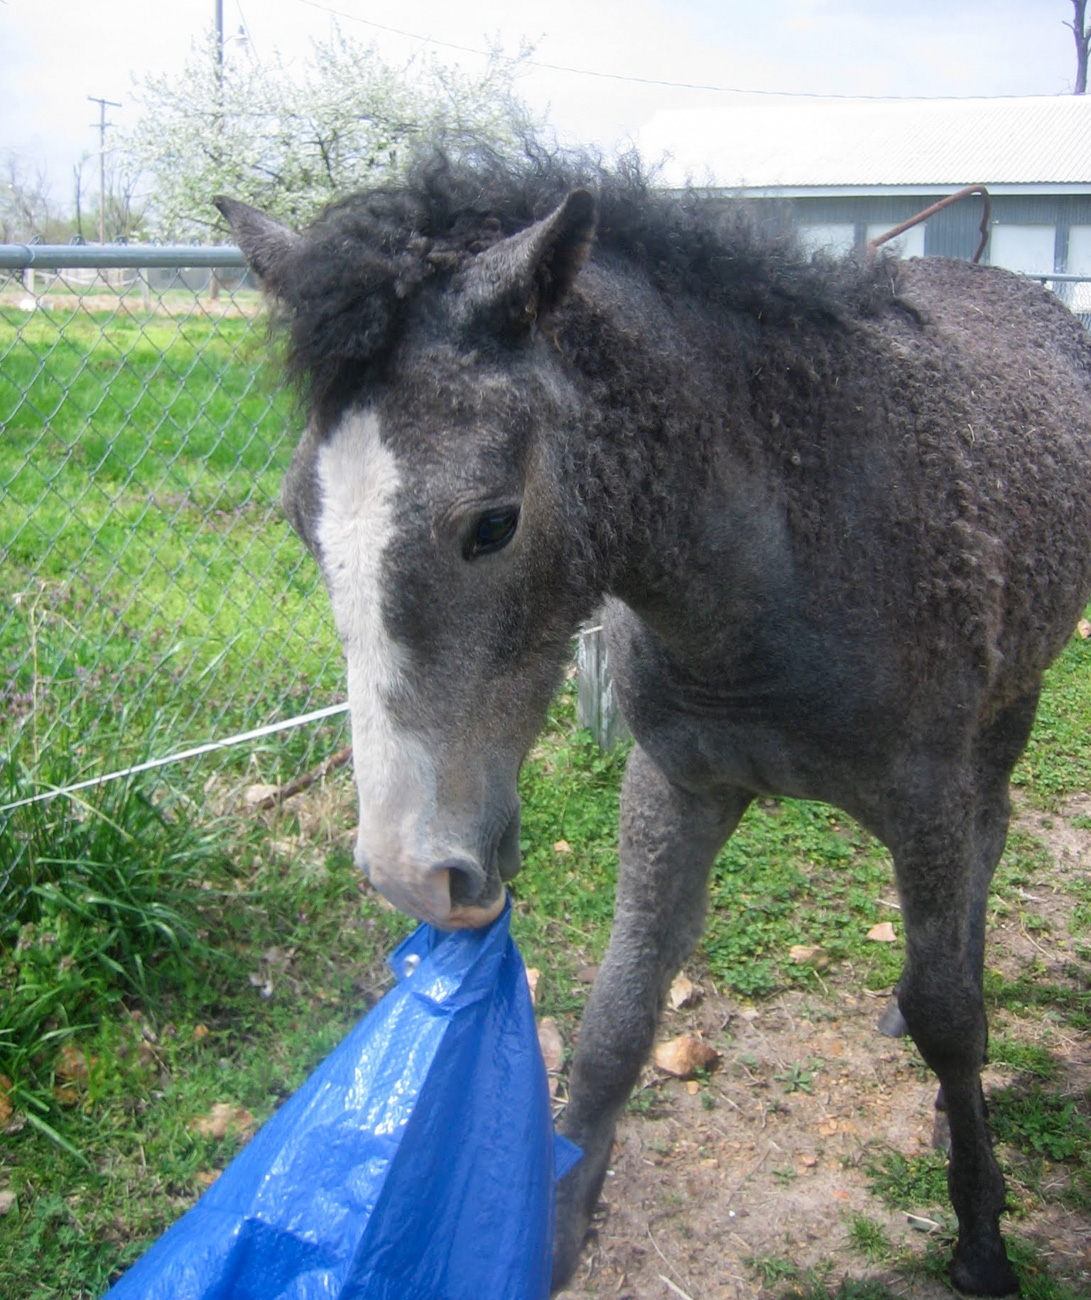 Some trainers antagonize horses with frightening experiences like flapping tarps, but if left alone with these items with minimal supervision, most young horses will explore and orient themselves to the object.